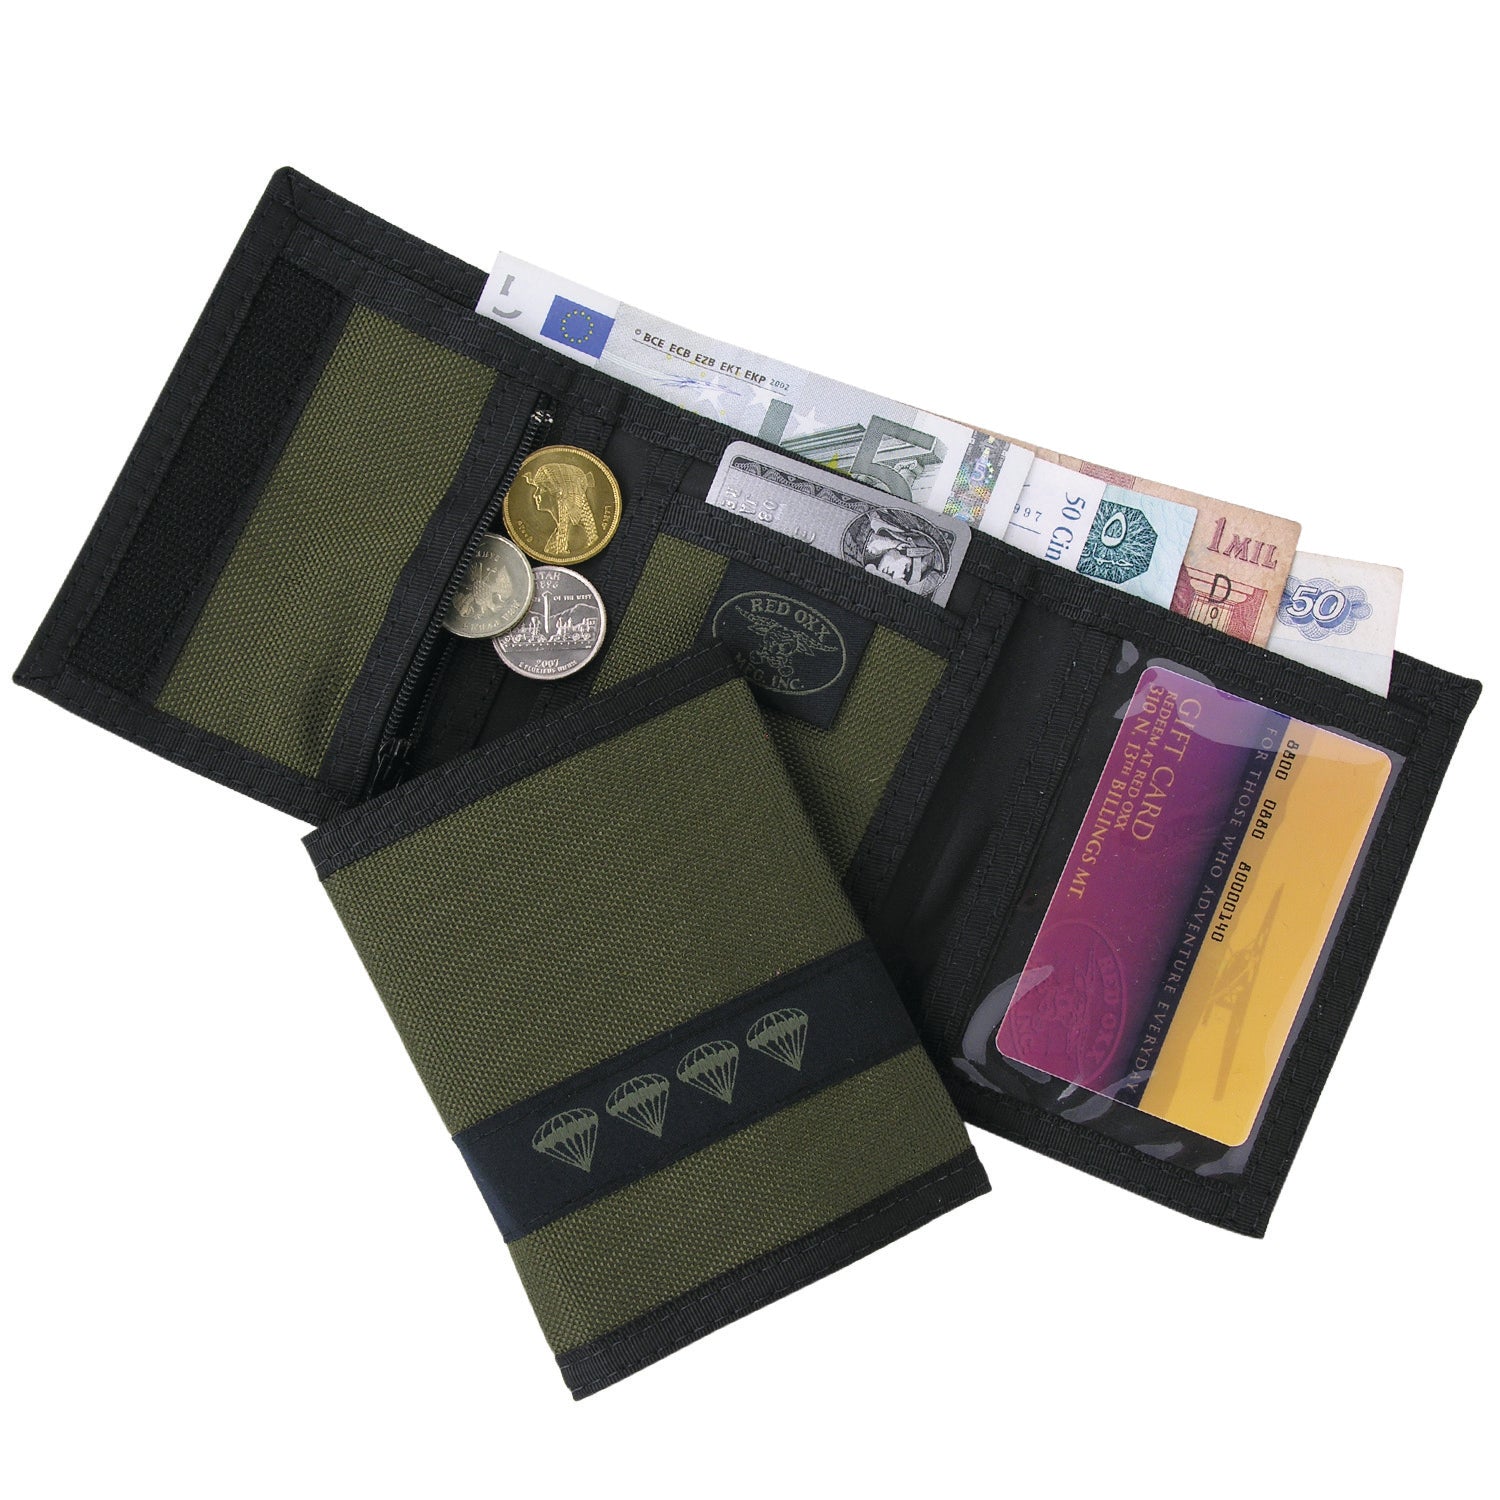 Wallet is sized to fit all bills and coins. 